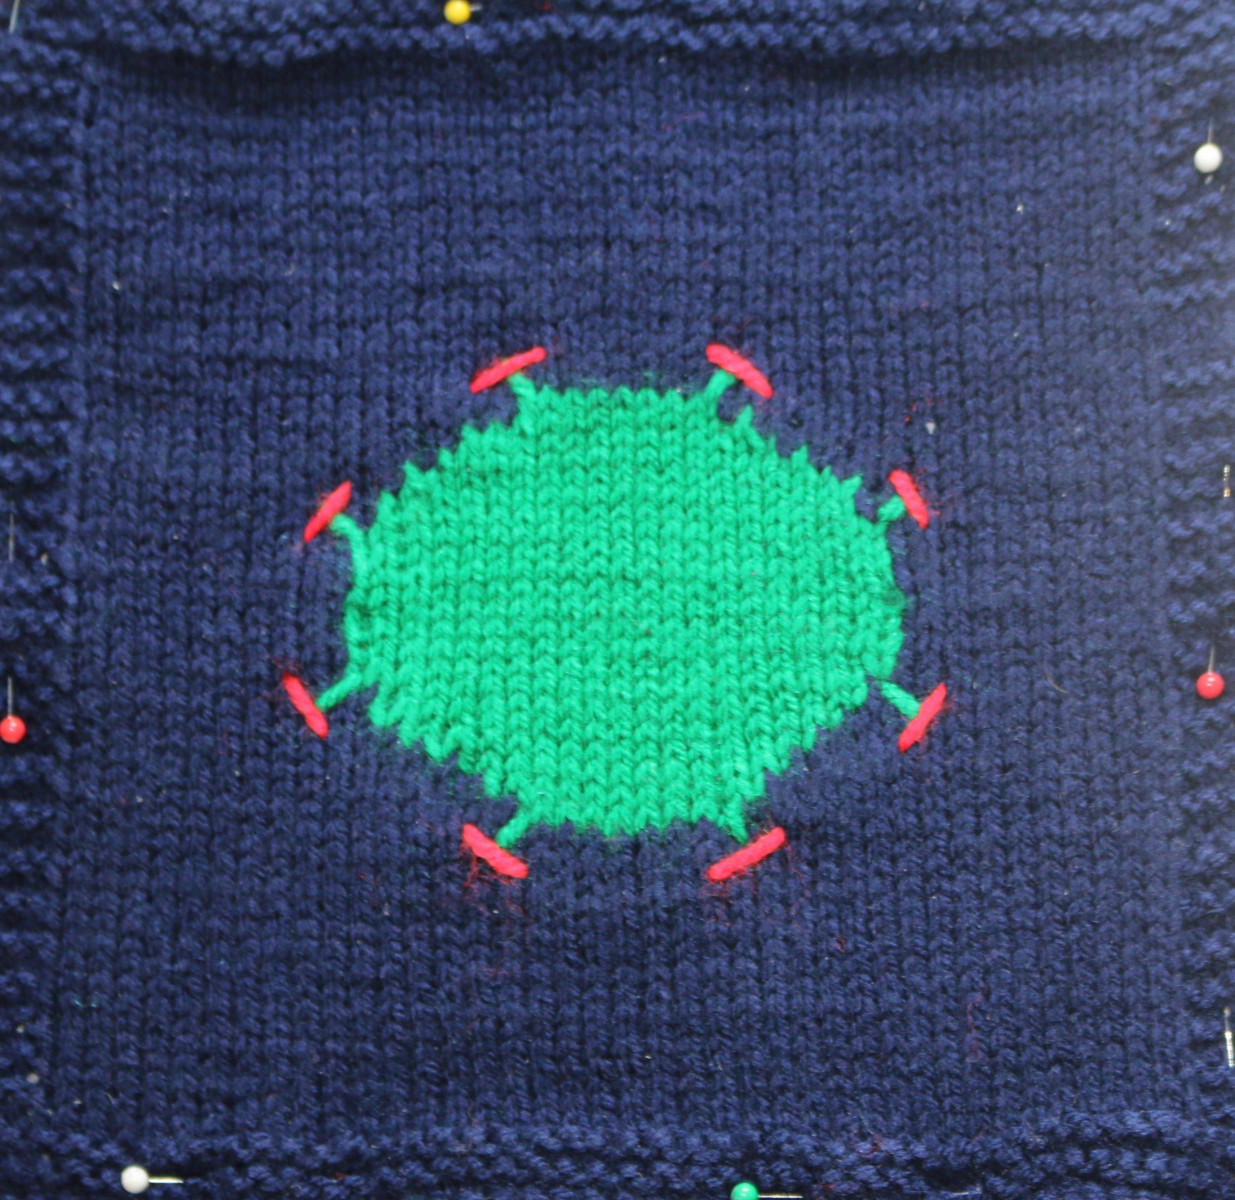 Knitted navy square with knitted image representing the Coronavirus